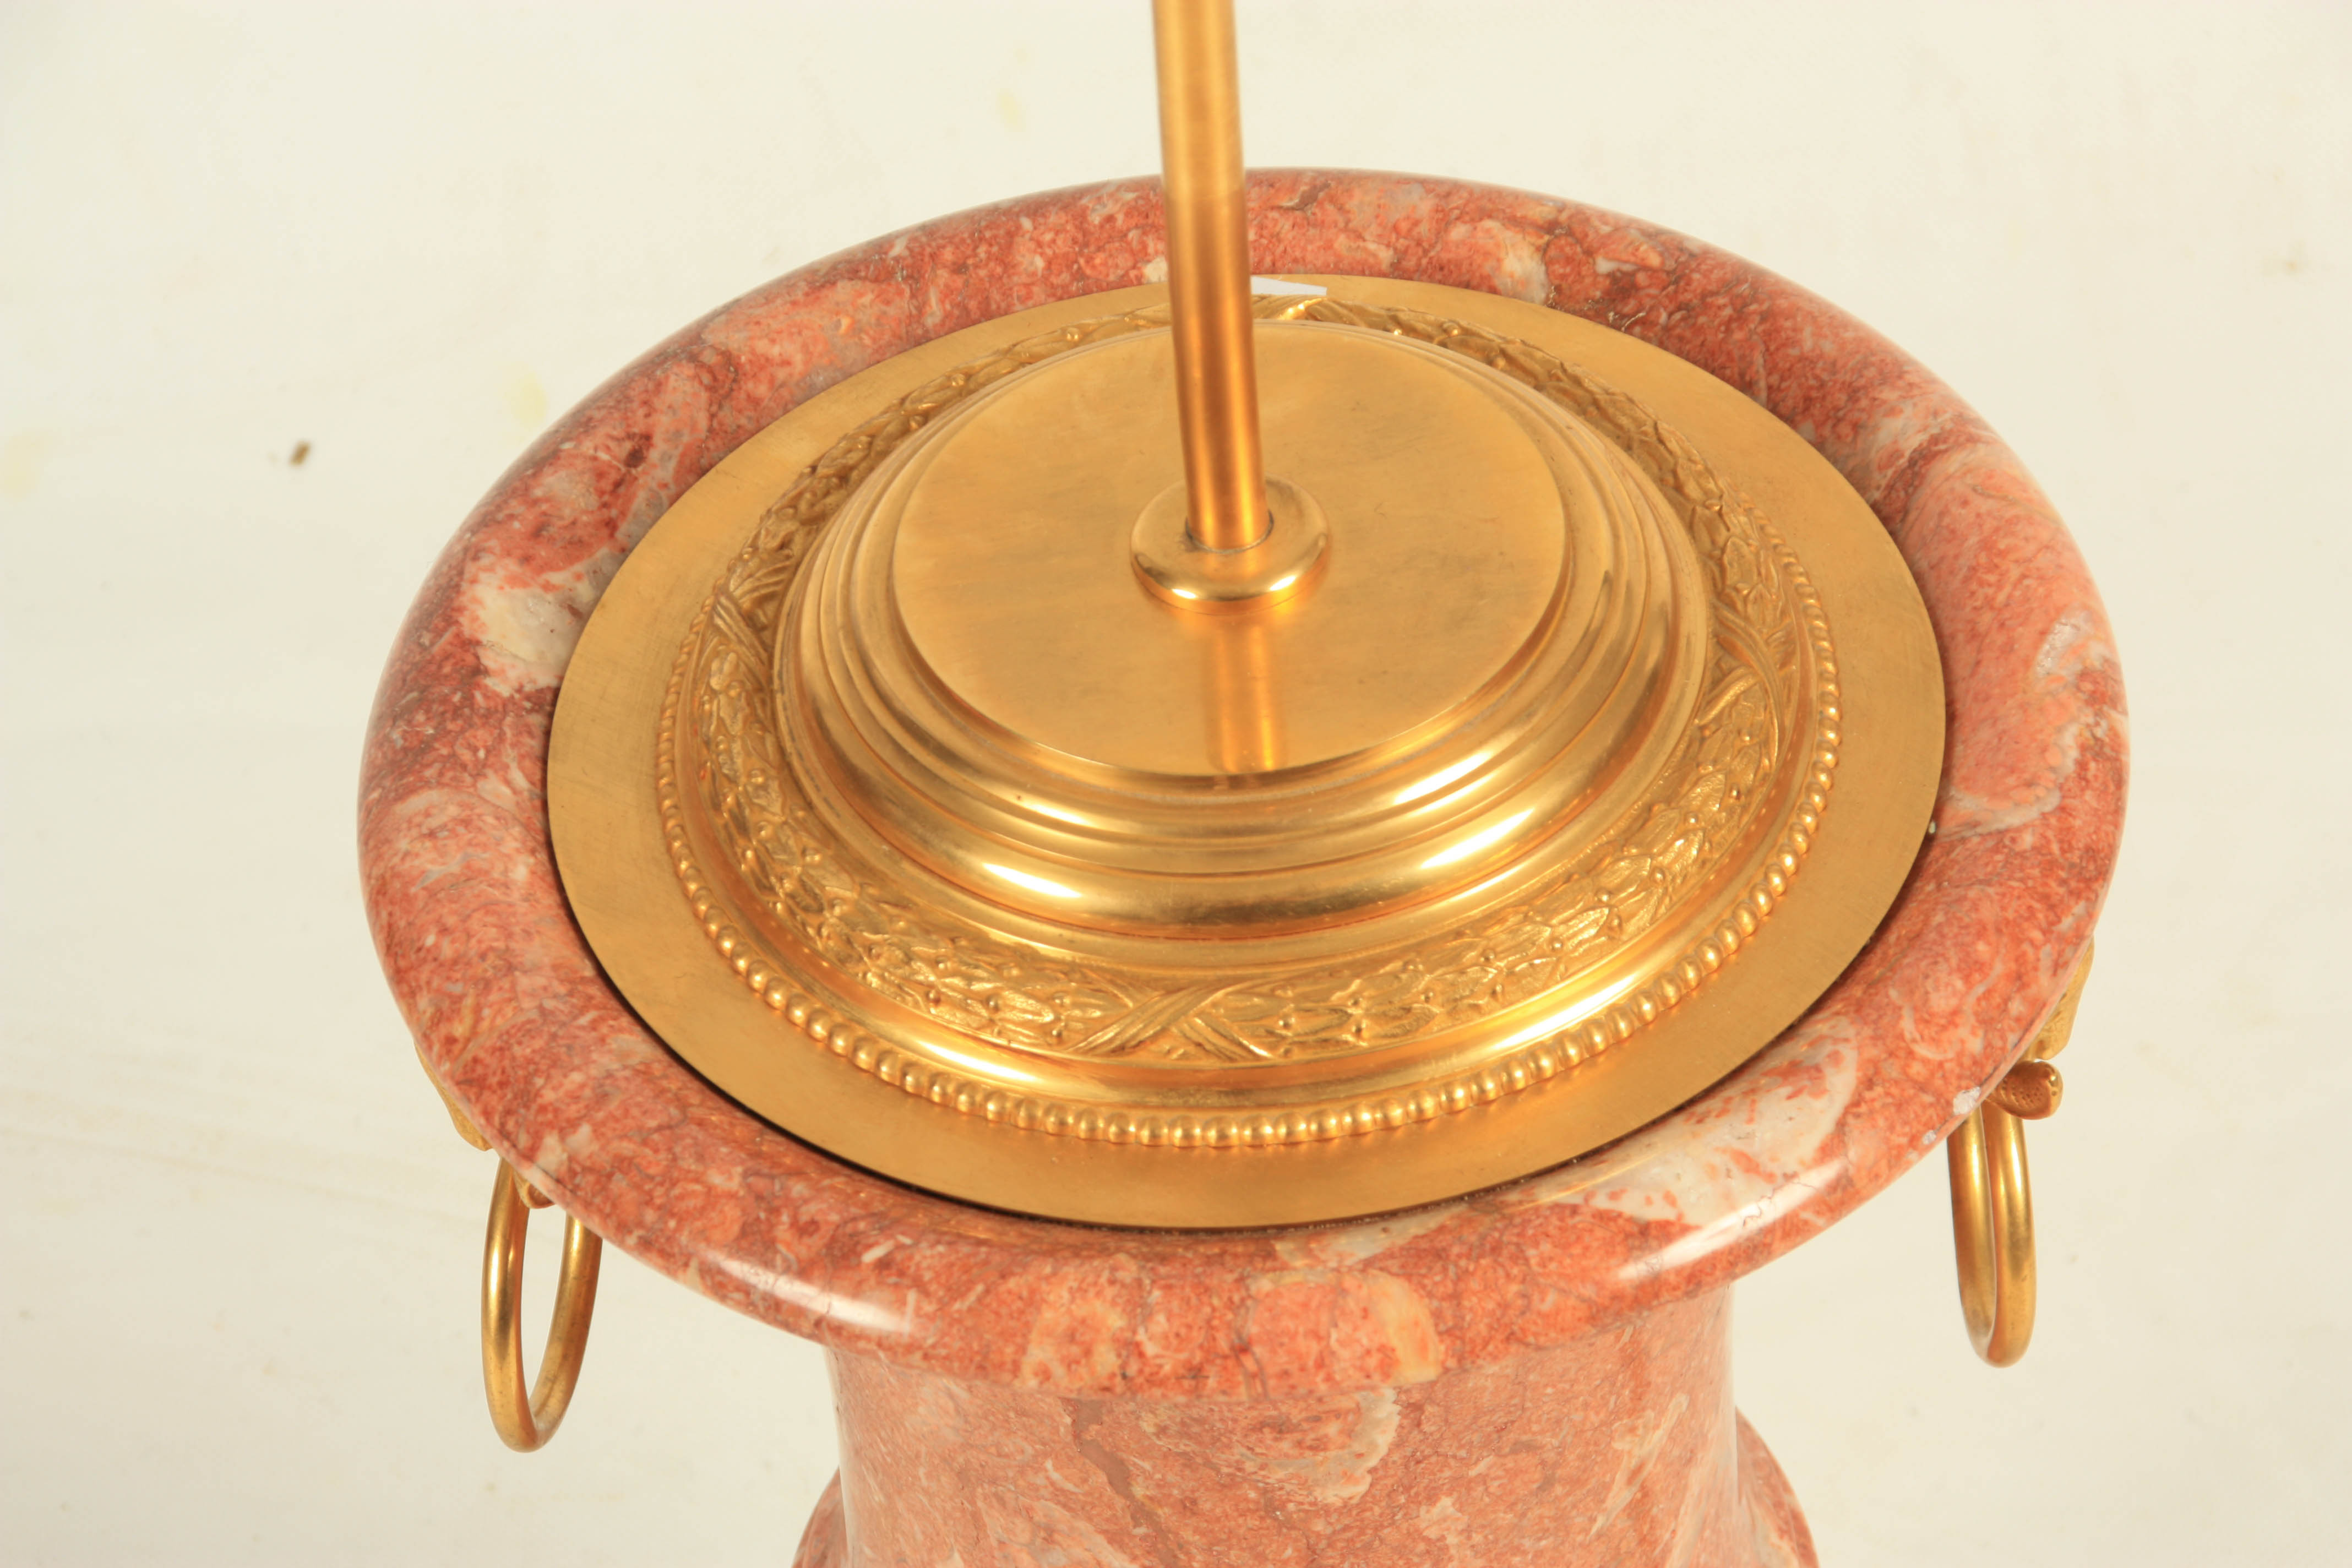 A 20TH CENTURY FRENCH MARBLE AND GILT BRASS TABLE LAMP with urn-shaped body and rams head side - Image 4 of 6